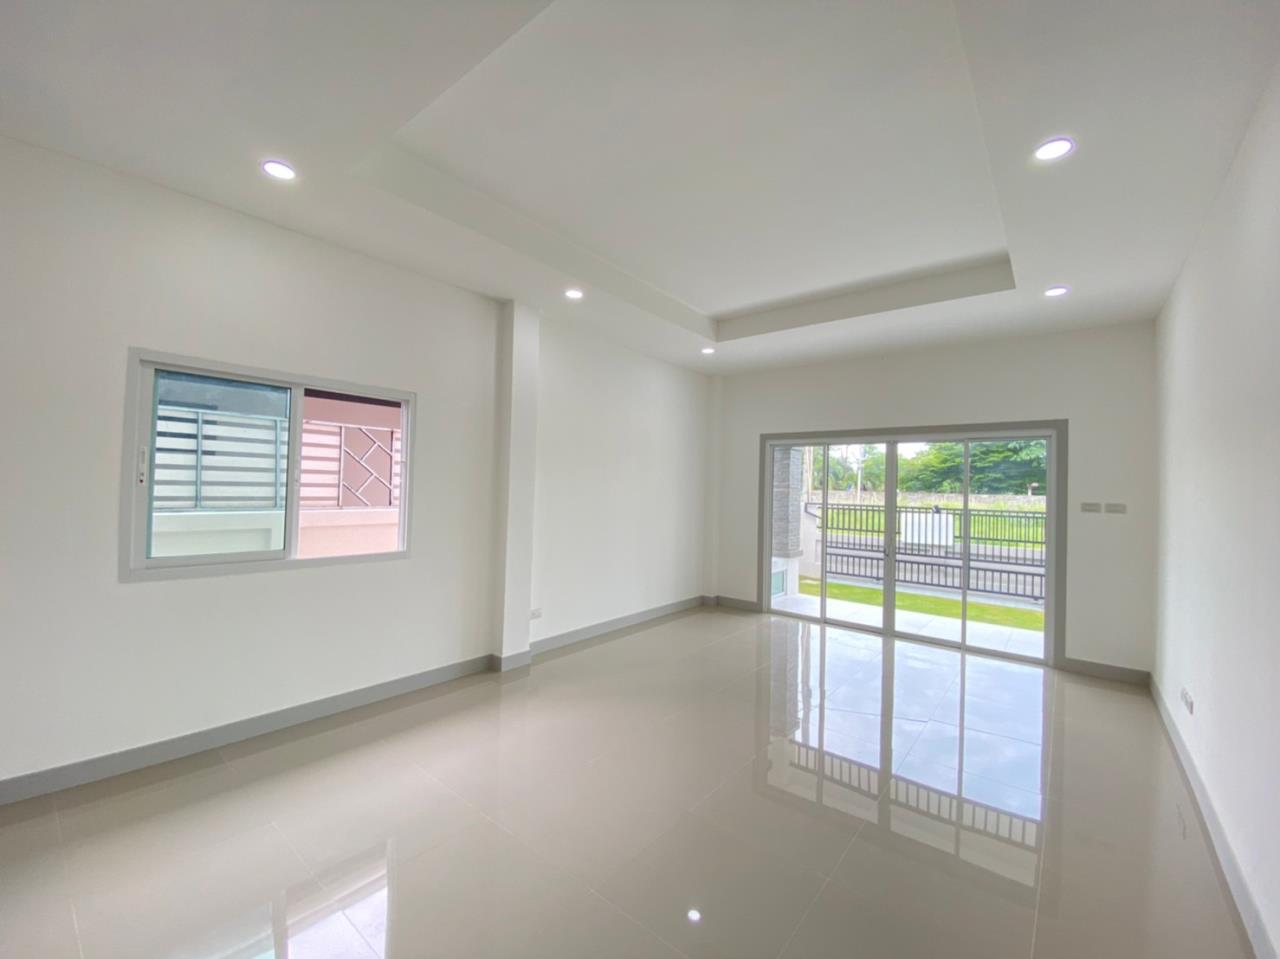 Thaiproperty1 Agency's New Single Storey House Project With Affordable Price - Hua Hin 10